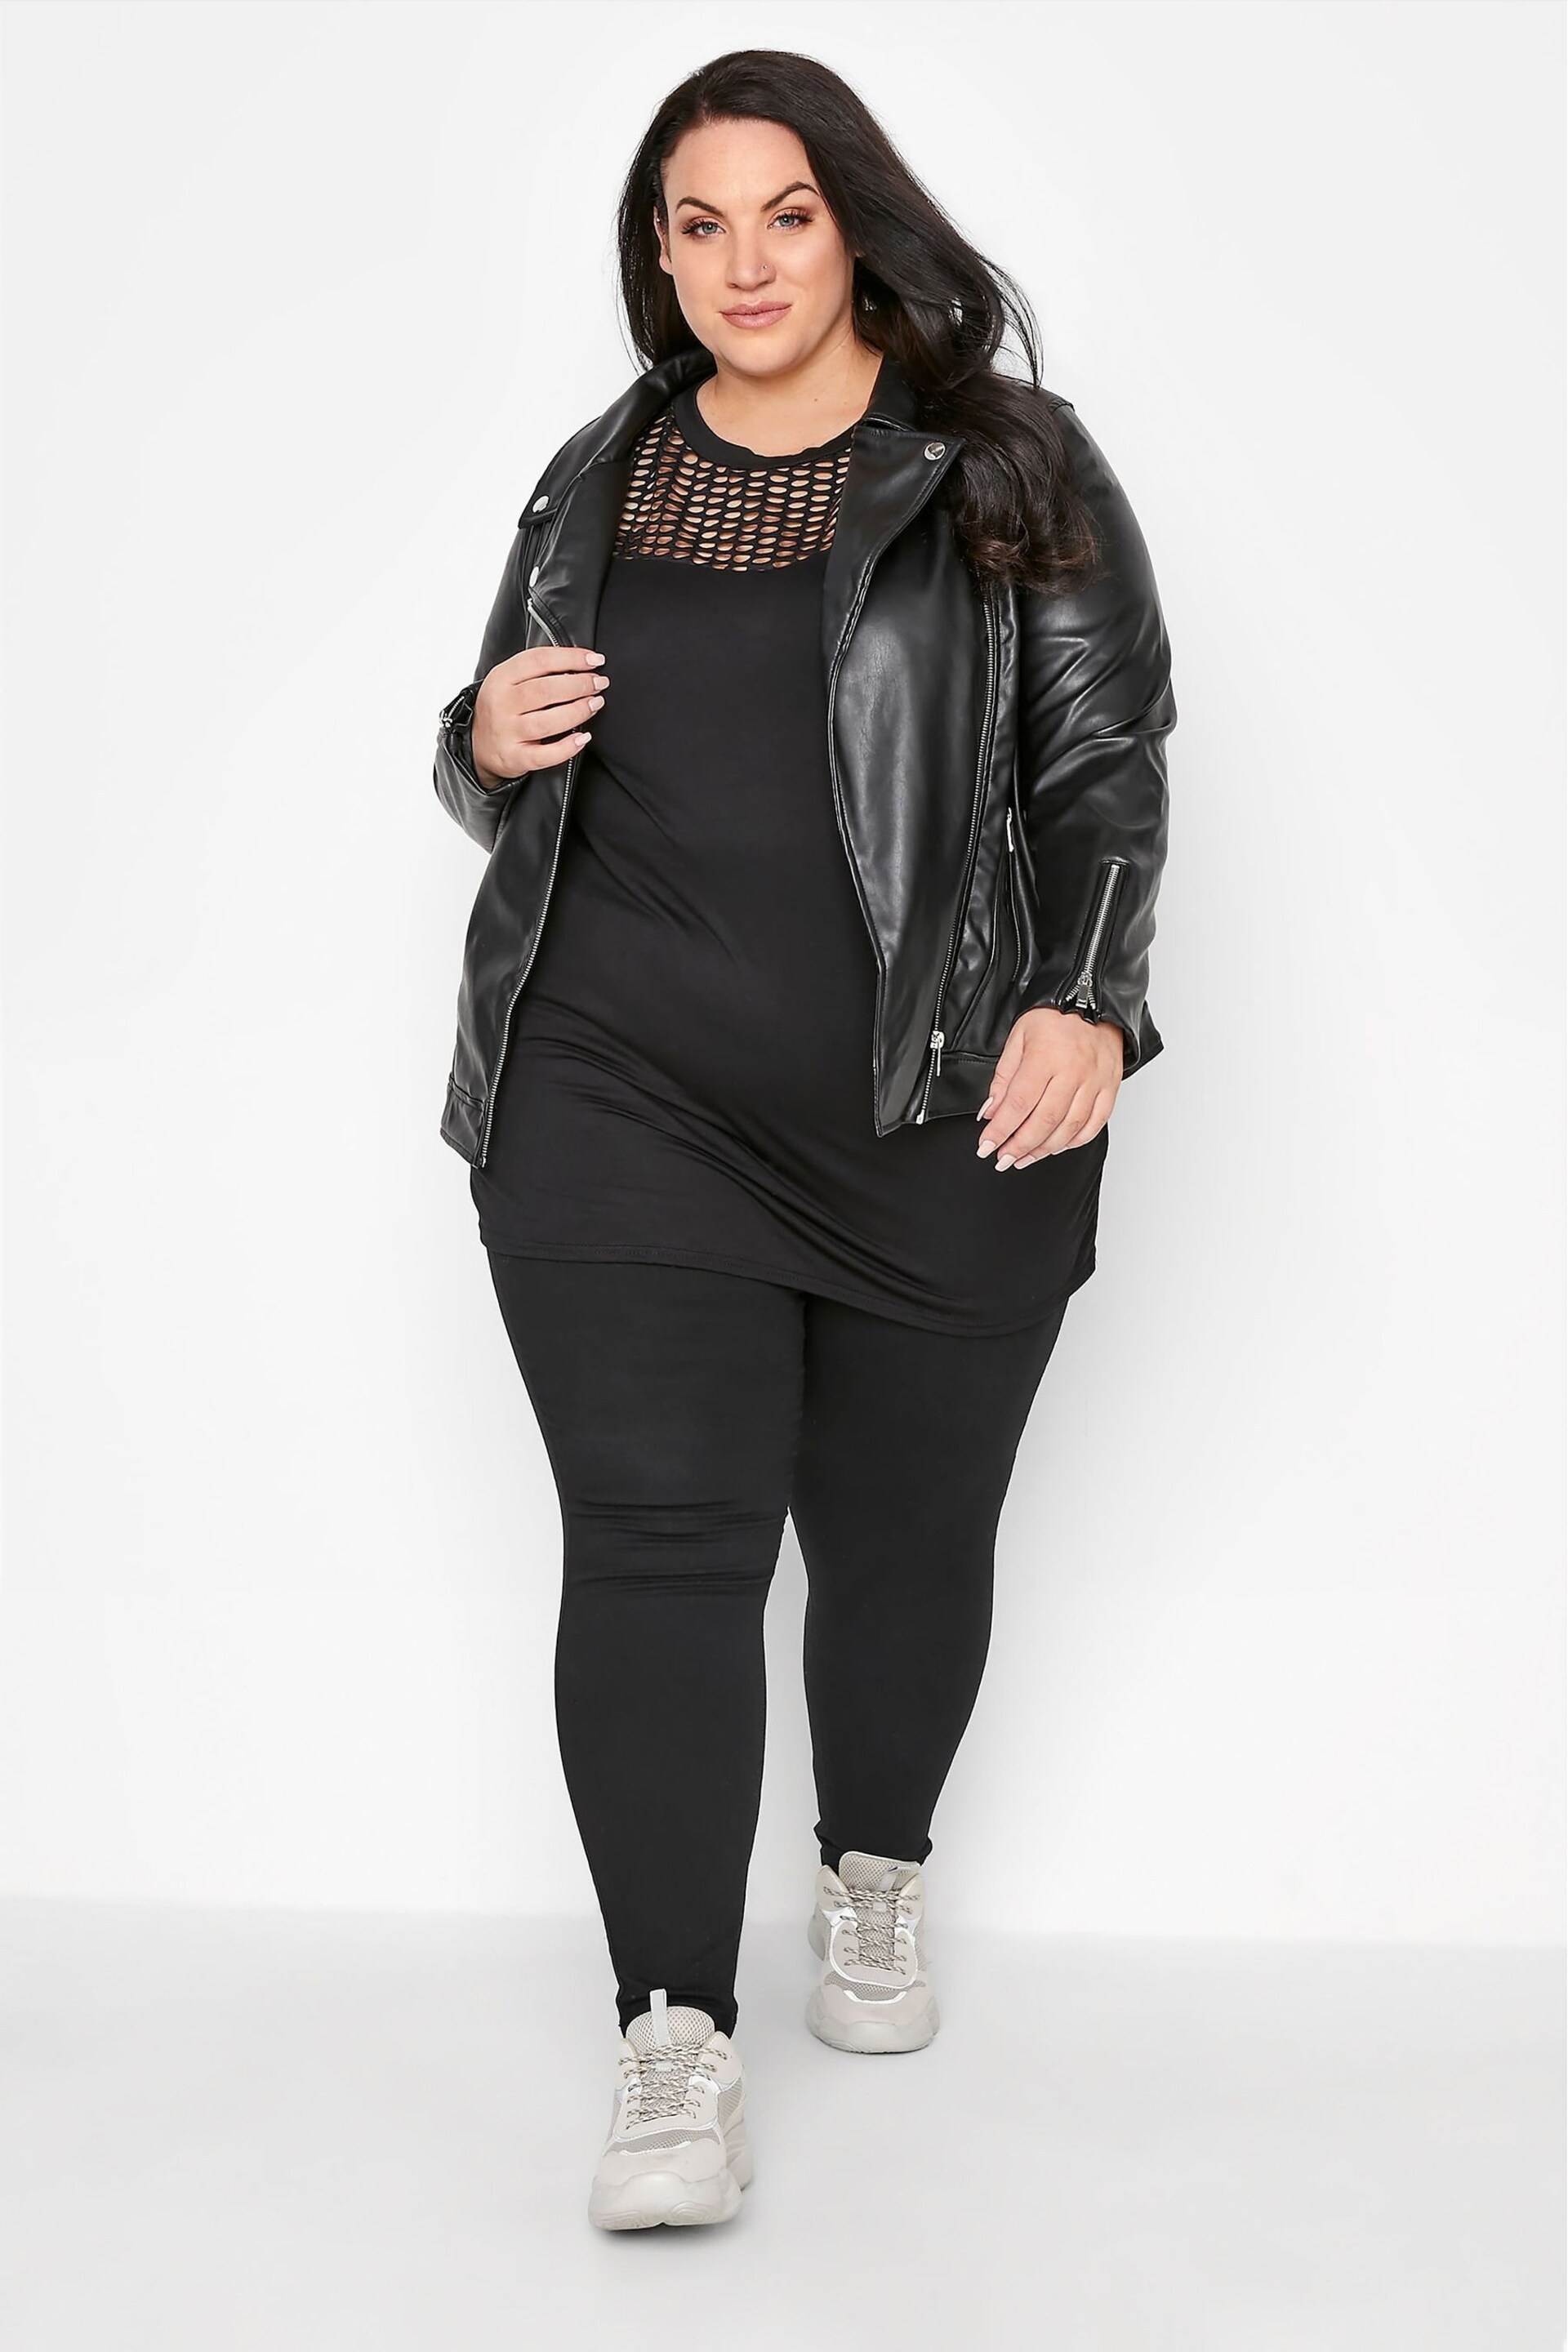 Yours Curve Black Stretch Pull On Jenny Jeggings - Image 4 of 5